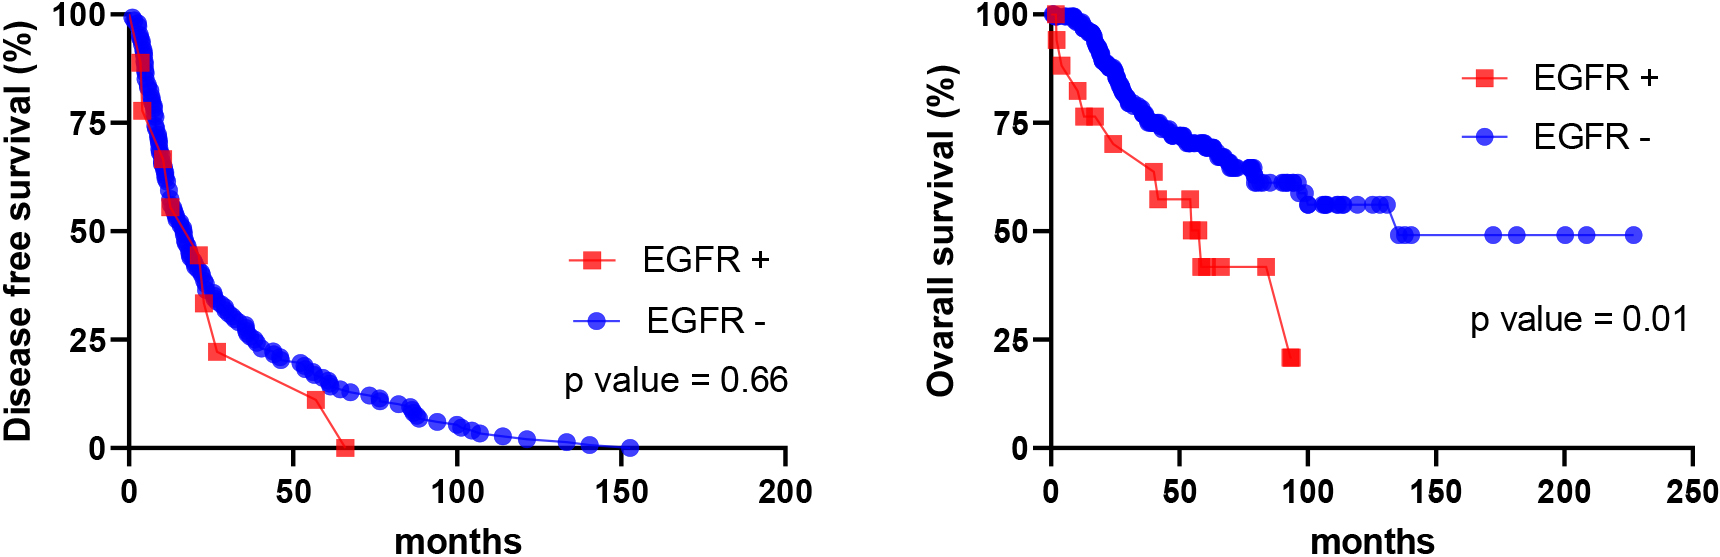 EGFR expression vs DFS (left) and OS (right) in cohort 2.